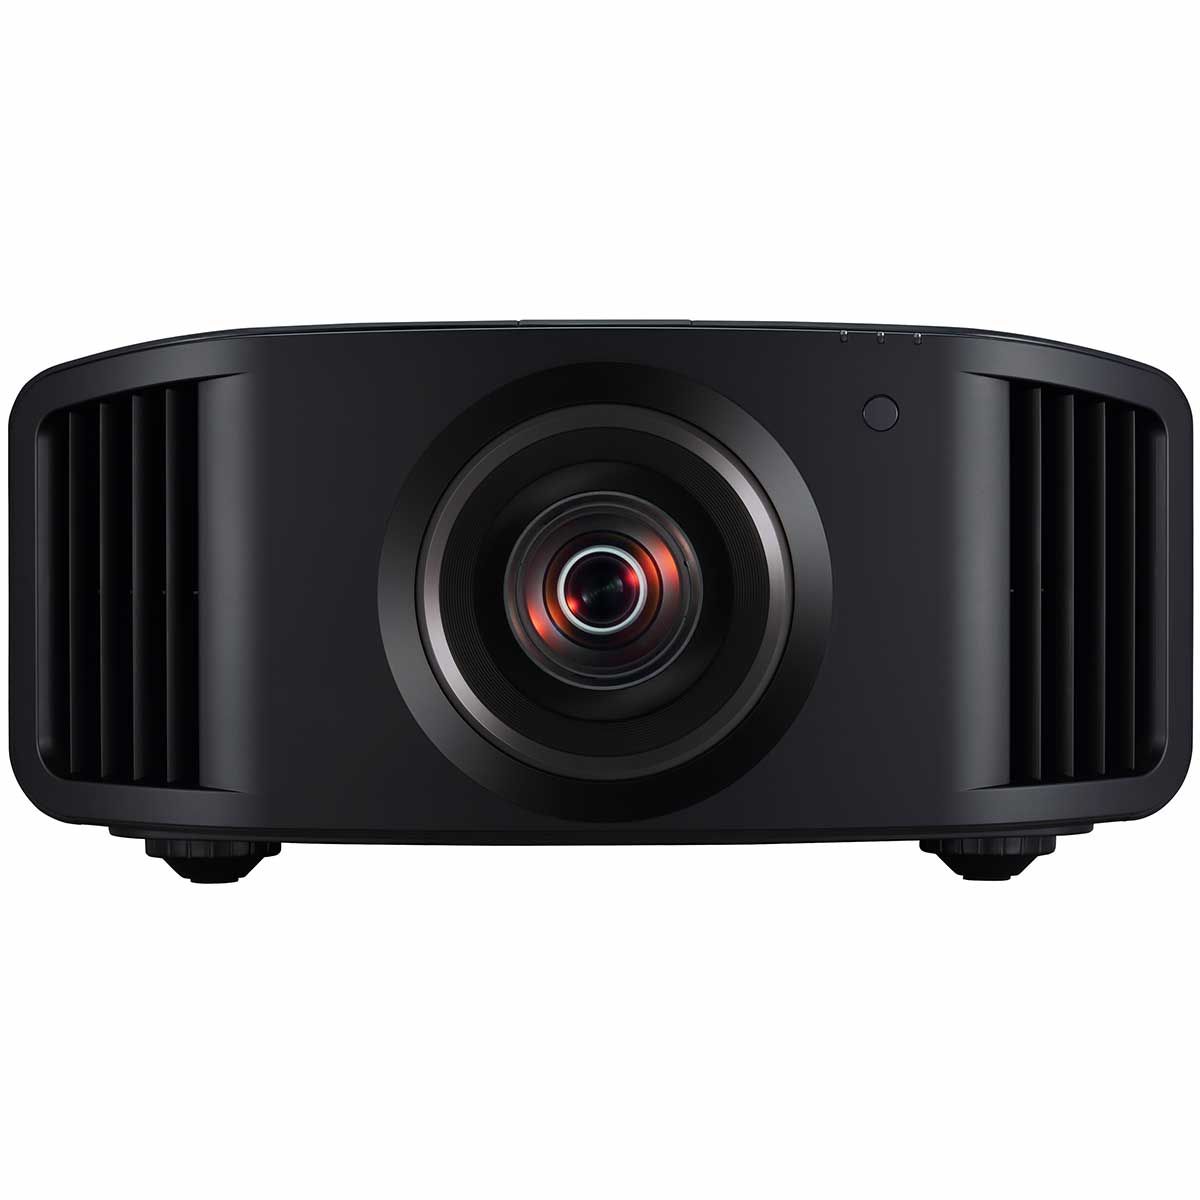 JVC DLA-NZ800 8K Home Theater Projector front view